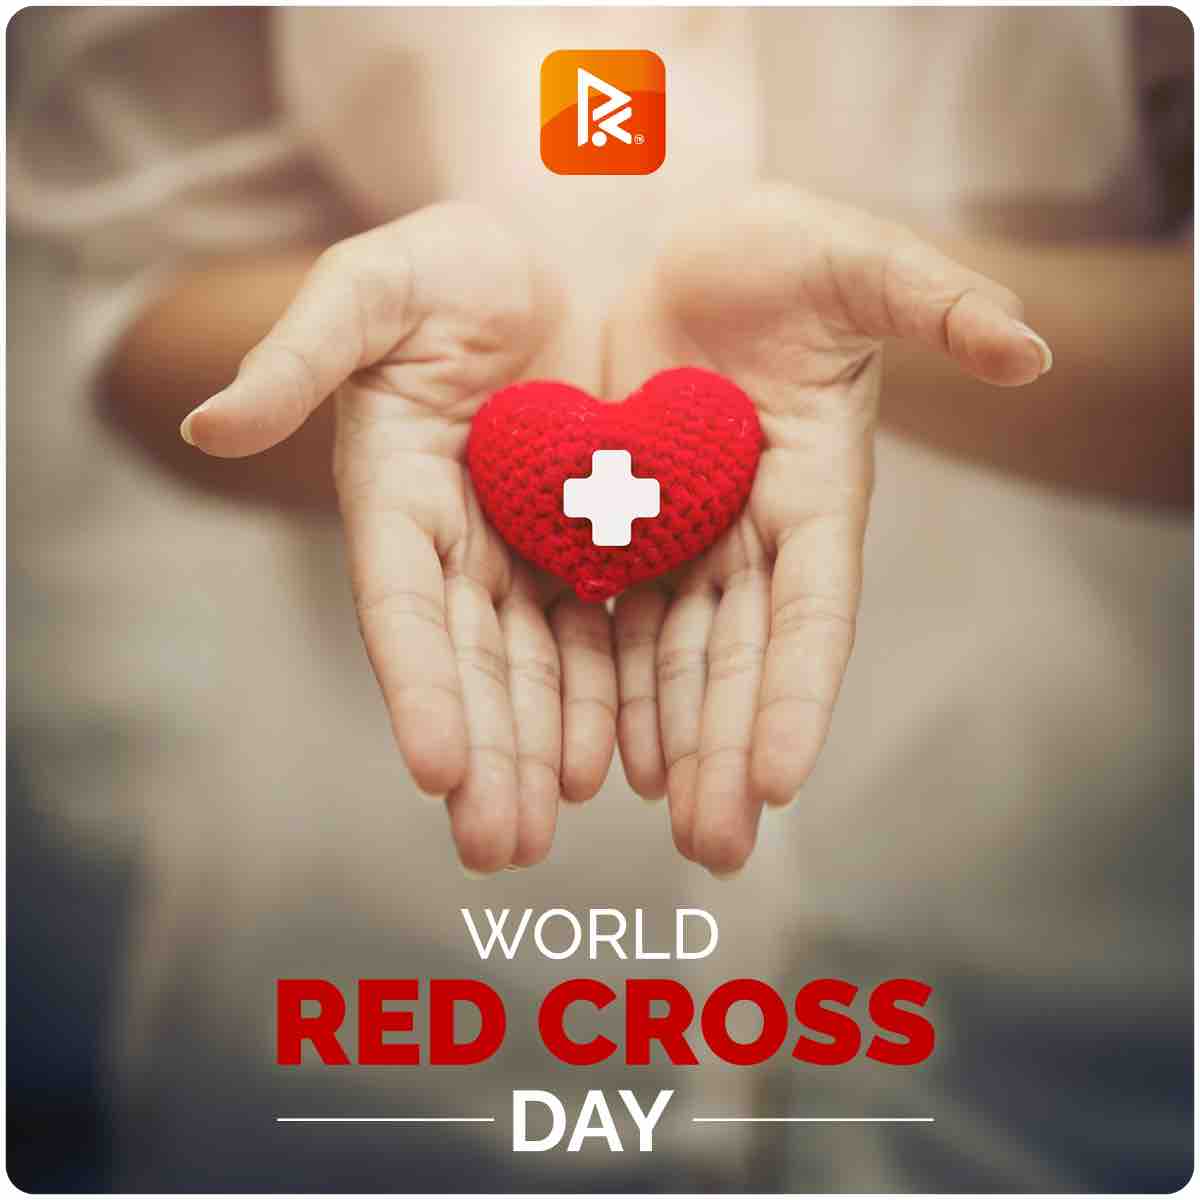 Today, on World Red Cross Day, we’re reminded of the values that drive us at Philcoin: integrity, compassion, and service to others. Just as the Red Cross extends a helping hand globally, we aim to do the same in the financial realm. 

#worldredcrossday #corporateresponsibility